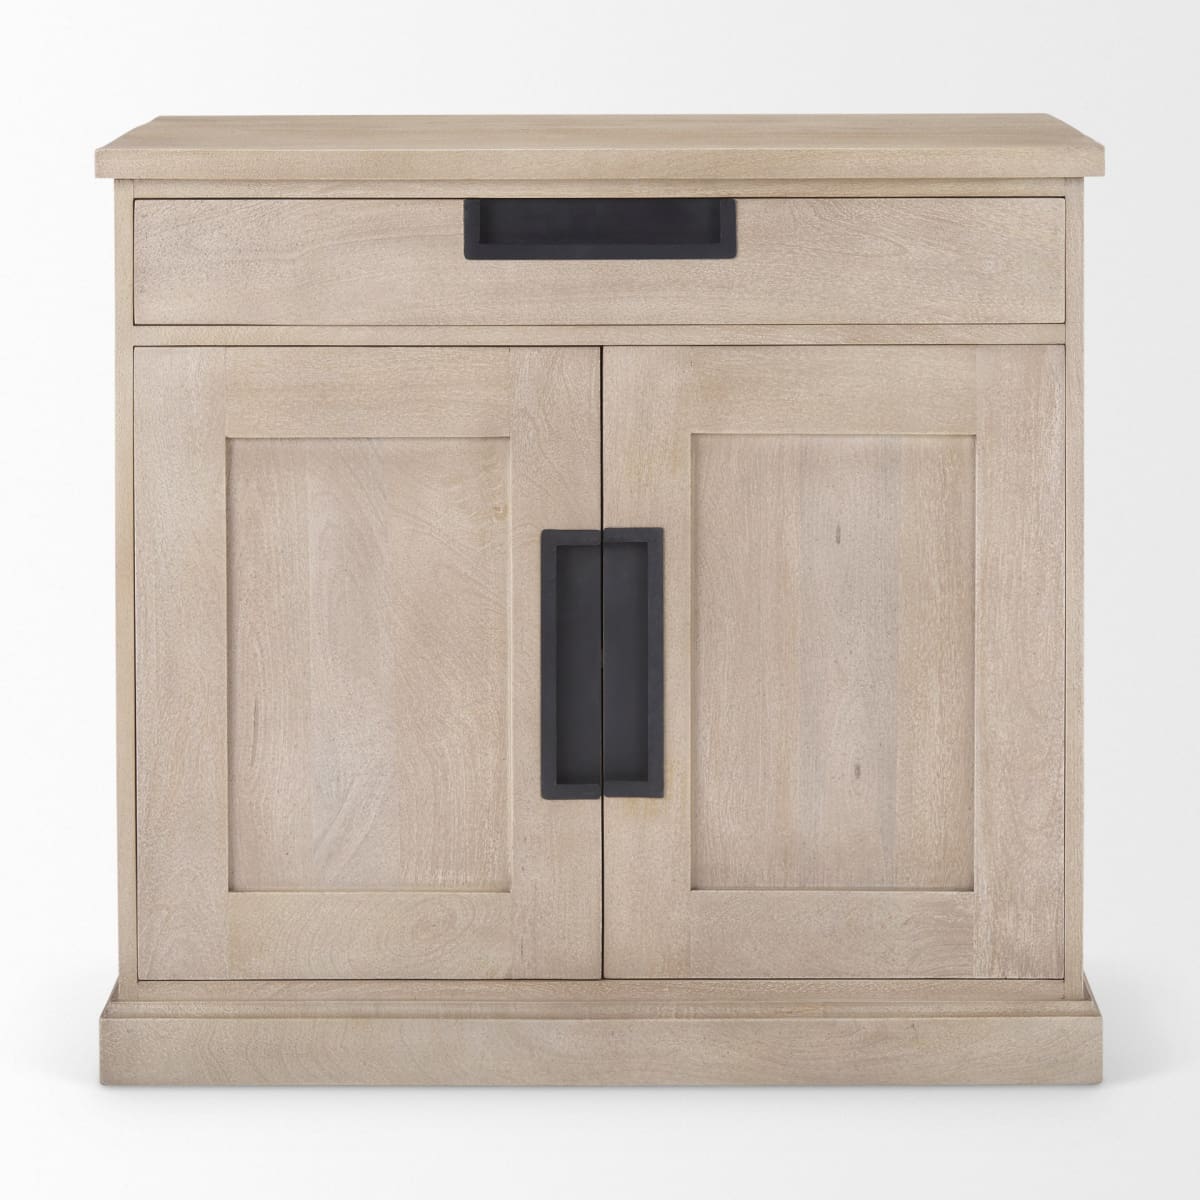 Braxton Accent Cabinet Light Brown Wood | Black Metal - acc-chest-cabinets